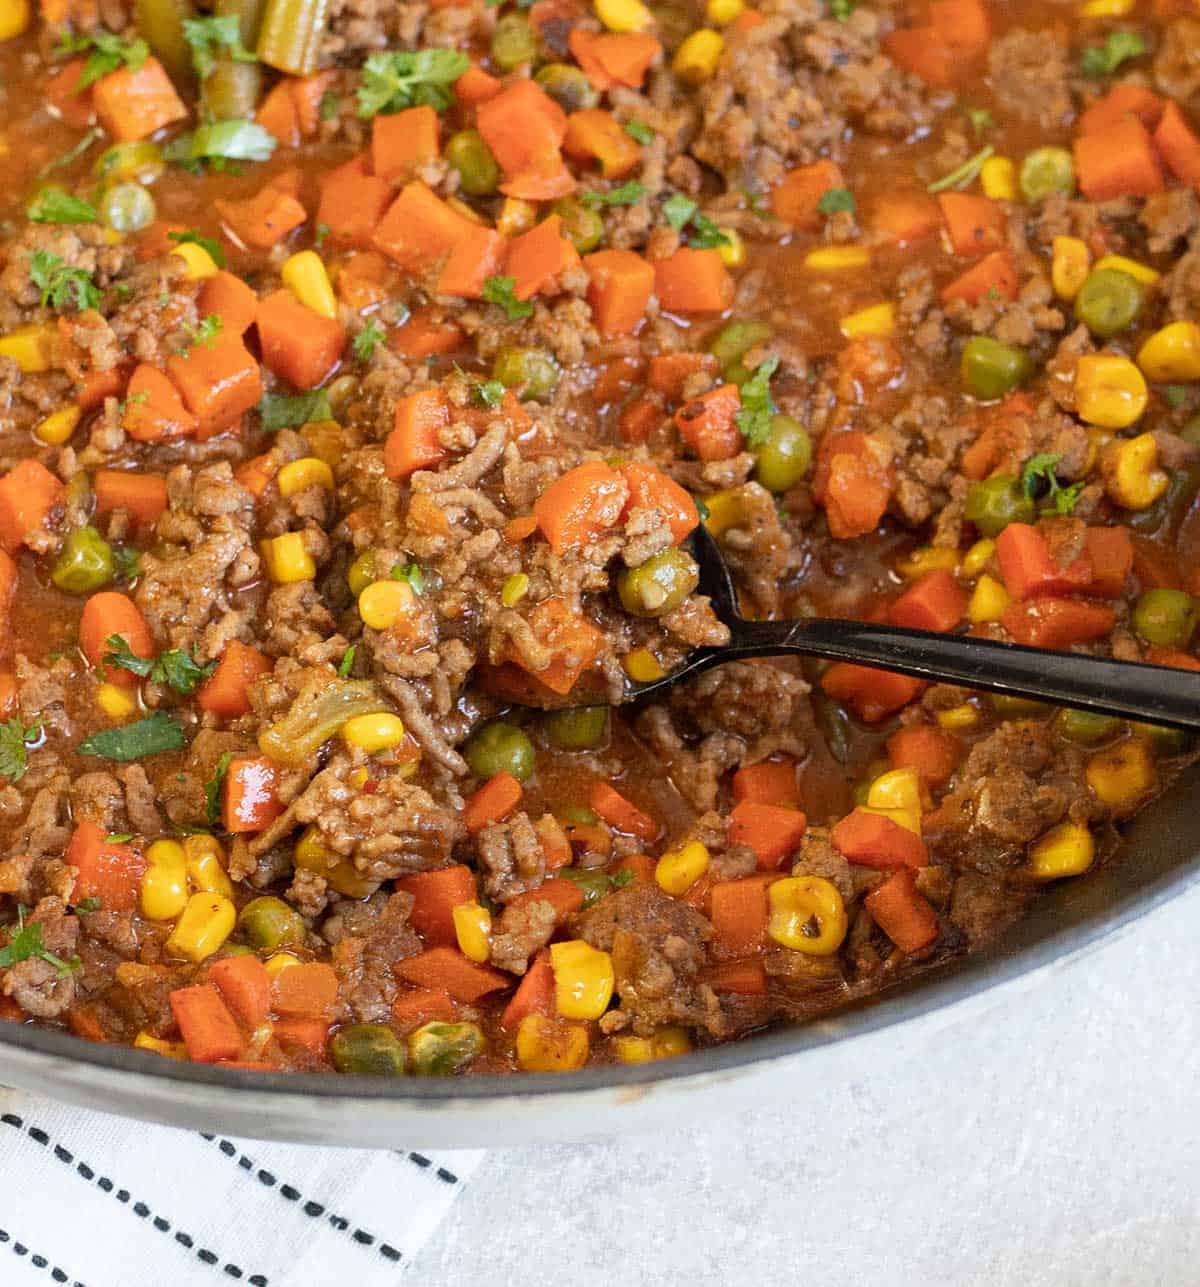 Savoury Mince with beef and veggies